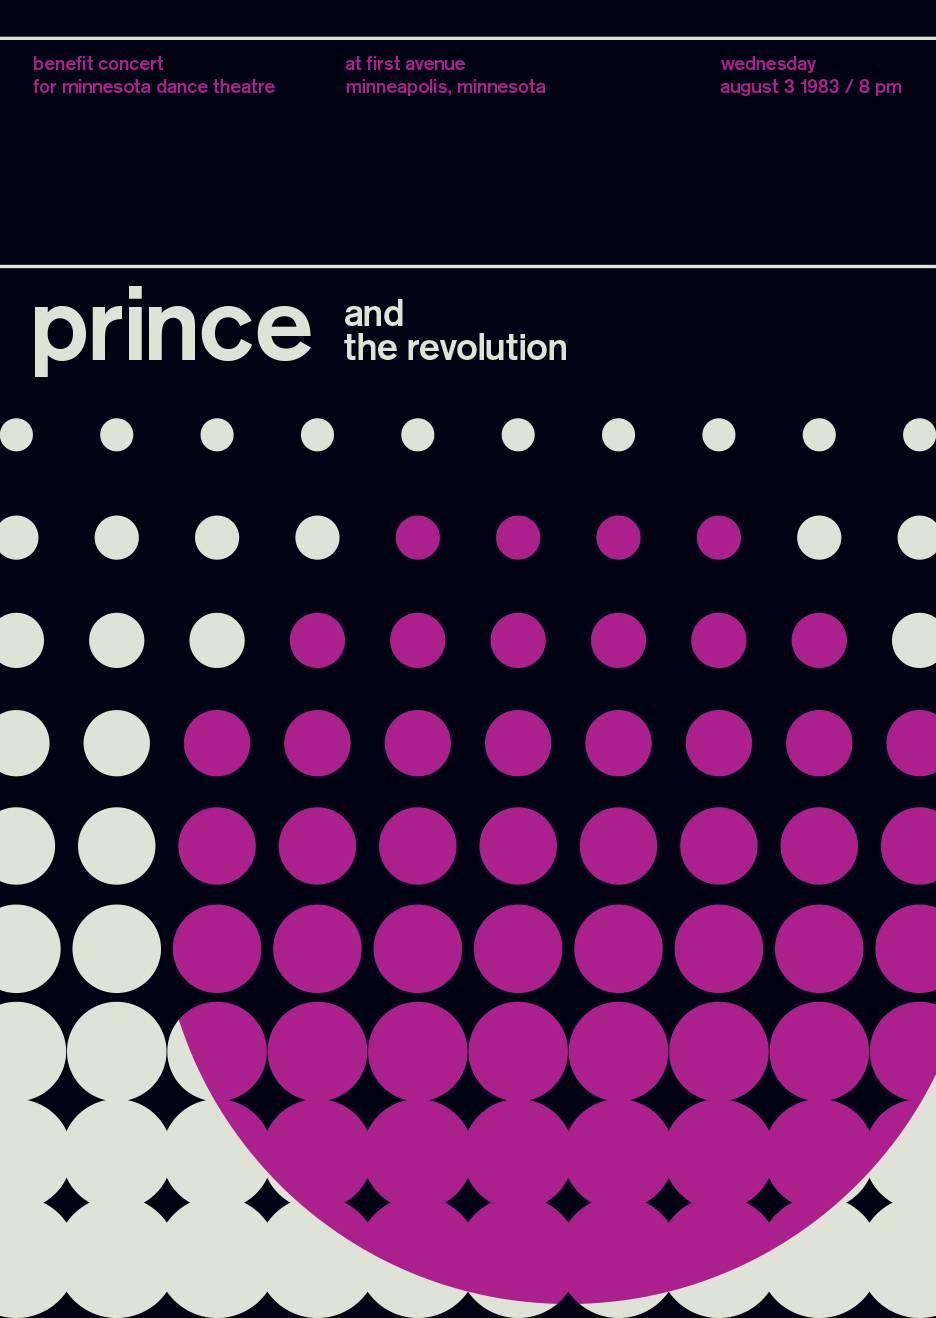 PRINCE, A Limited Edition Design Print - Art by Mike Joyce